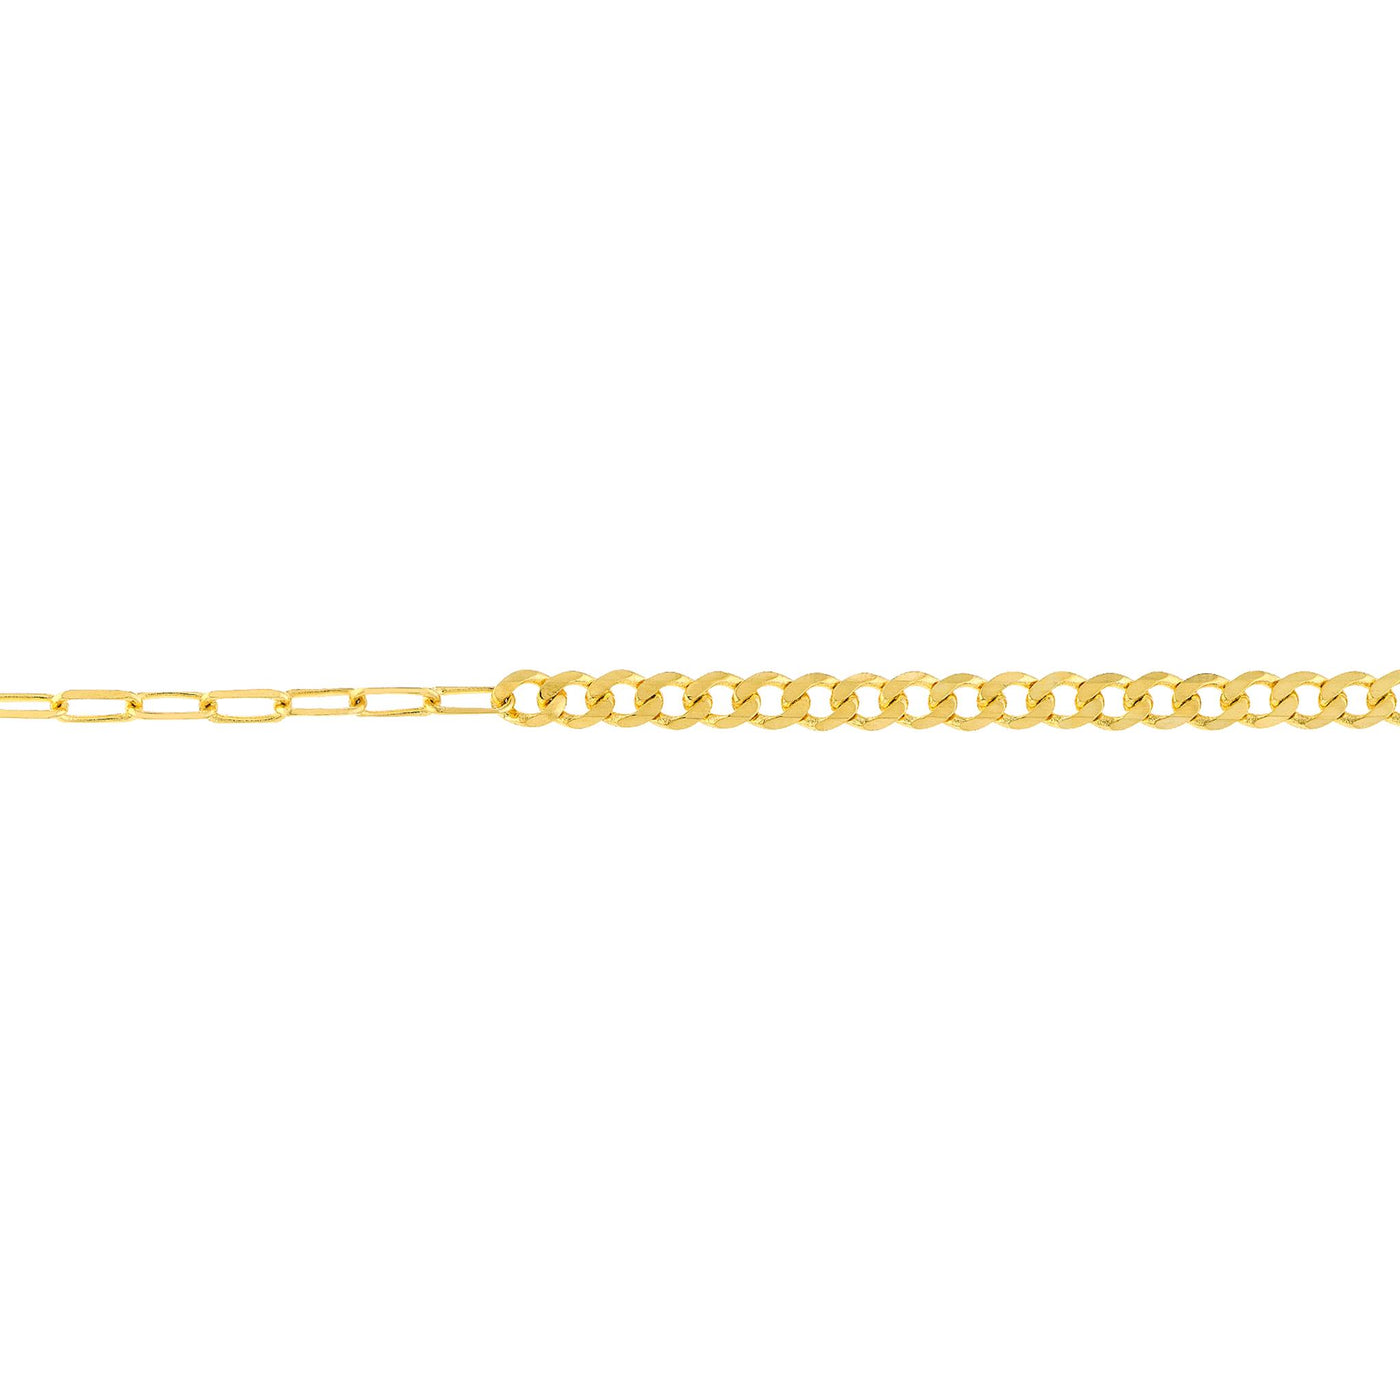 14K Yellow Gold 1.95mm 20" Polished Paper Clip Chain